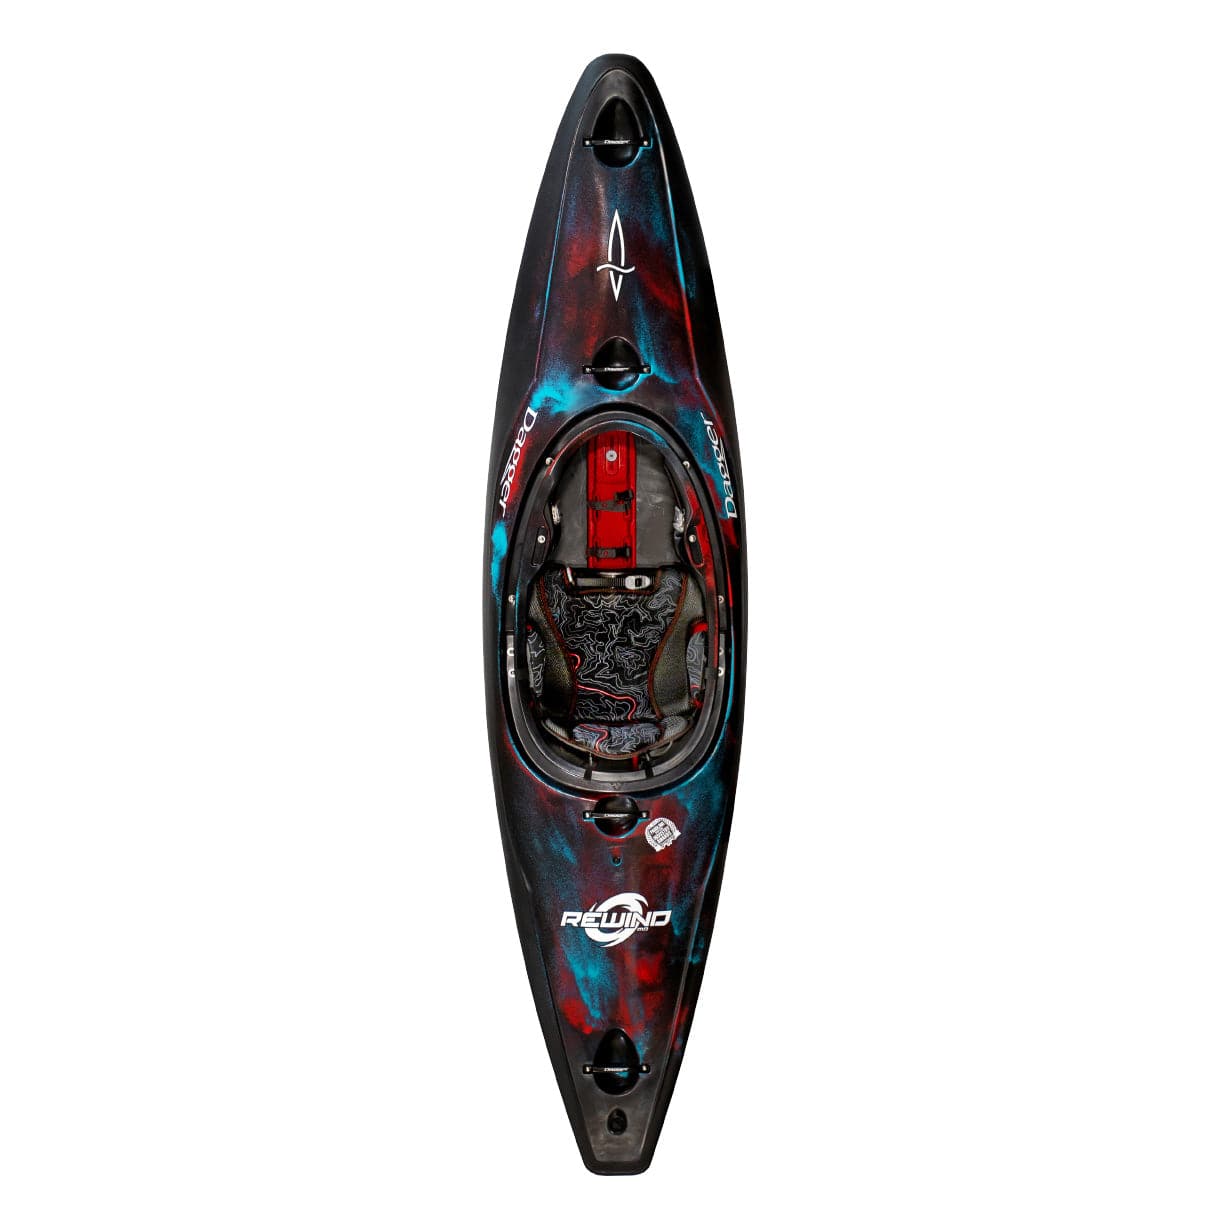 Featuring the Rewind creek boat, freestyle kayak, play boat, pre-order, river runner kayak manufactured by Dagger shown here from a fourth angle.